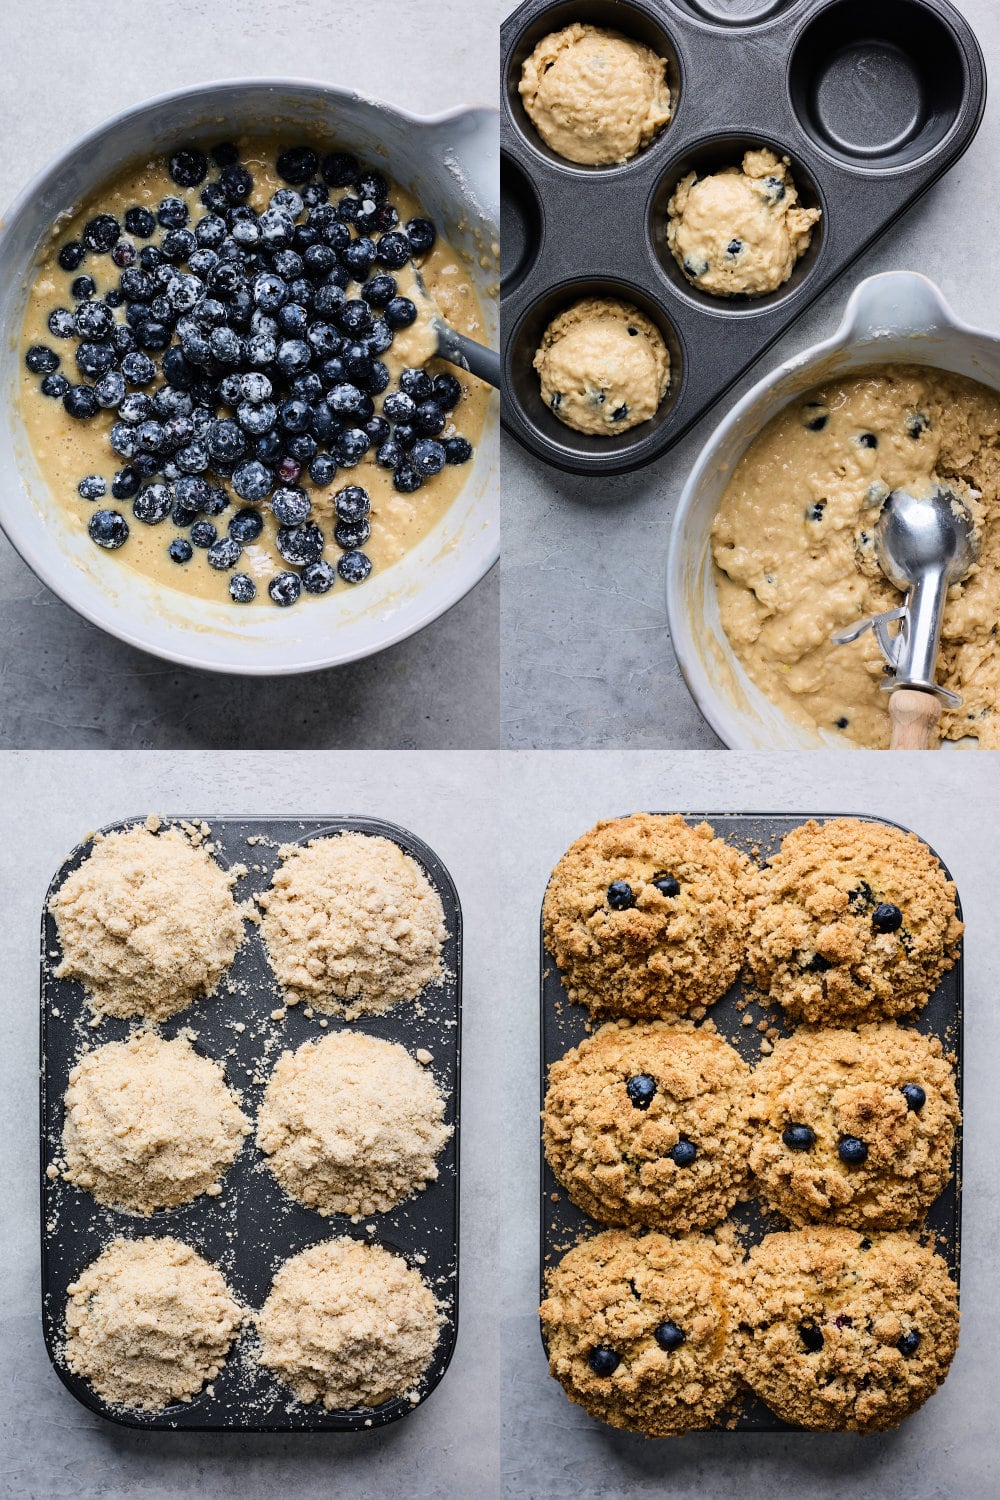 Bakery Style Blueberry Streusel Muffins Steps Part 1